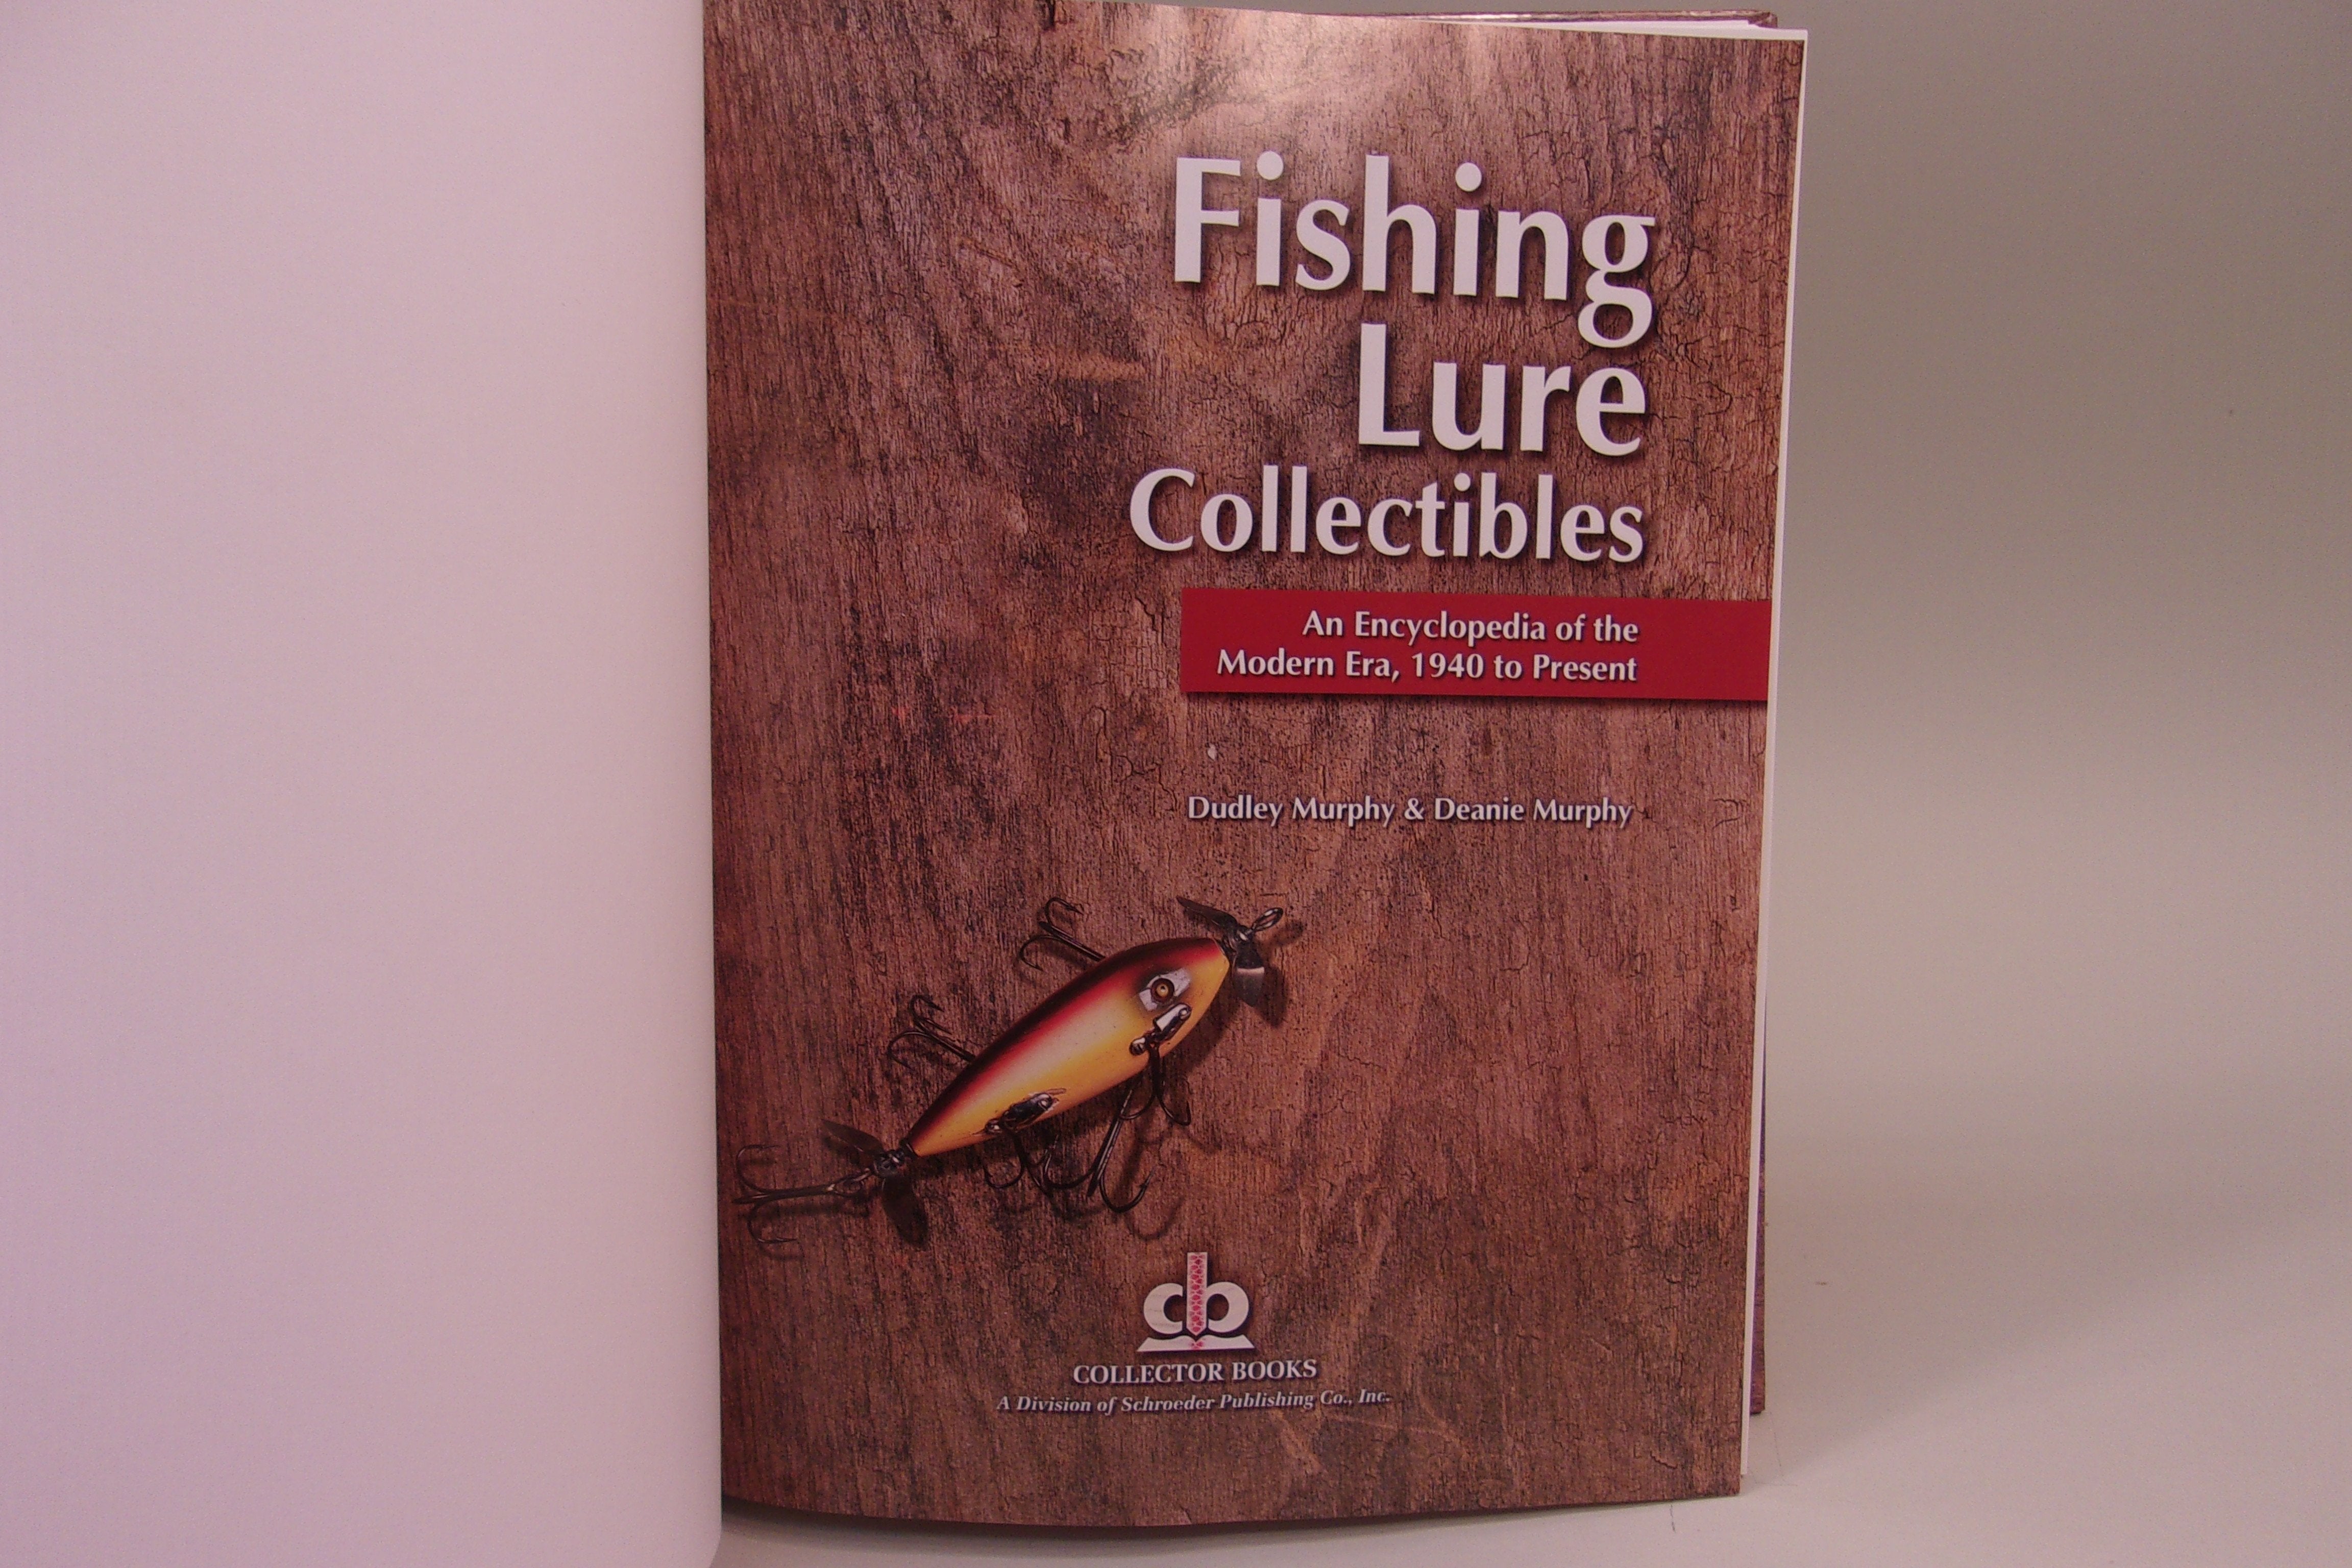 Fishing Lure Collectibles, Encyclopedia of Modern Era 1940 to Present